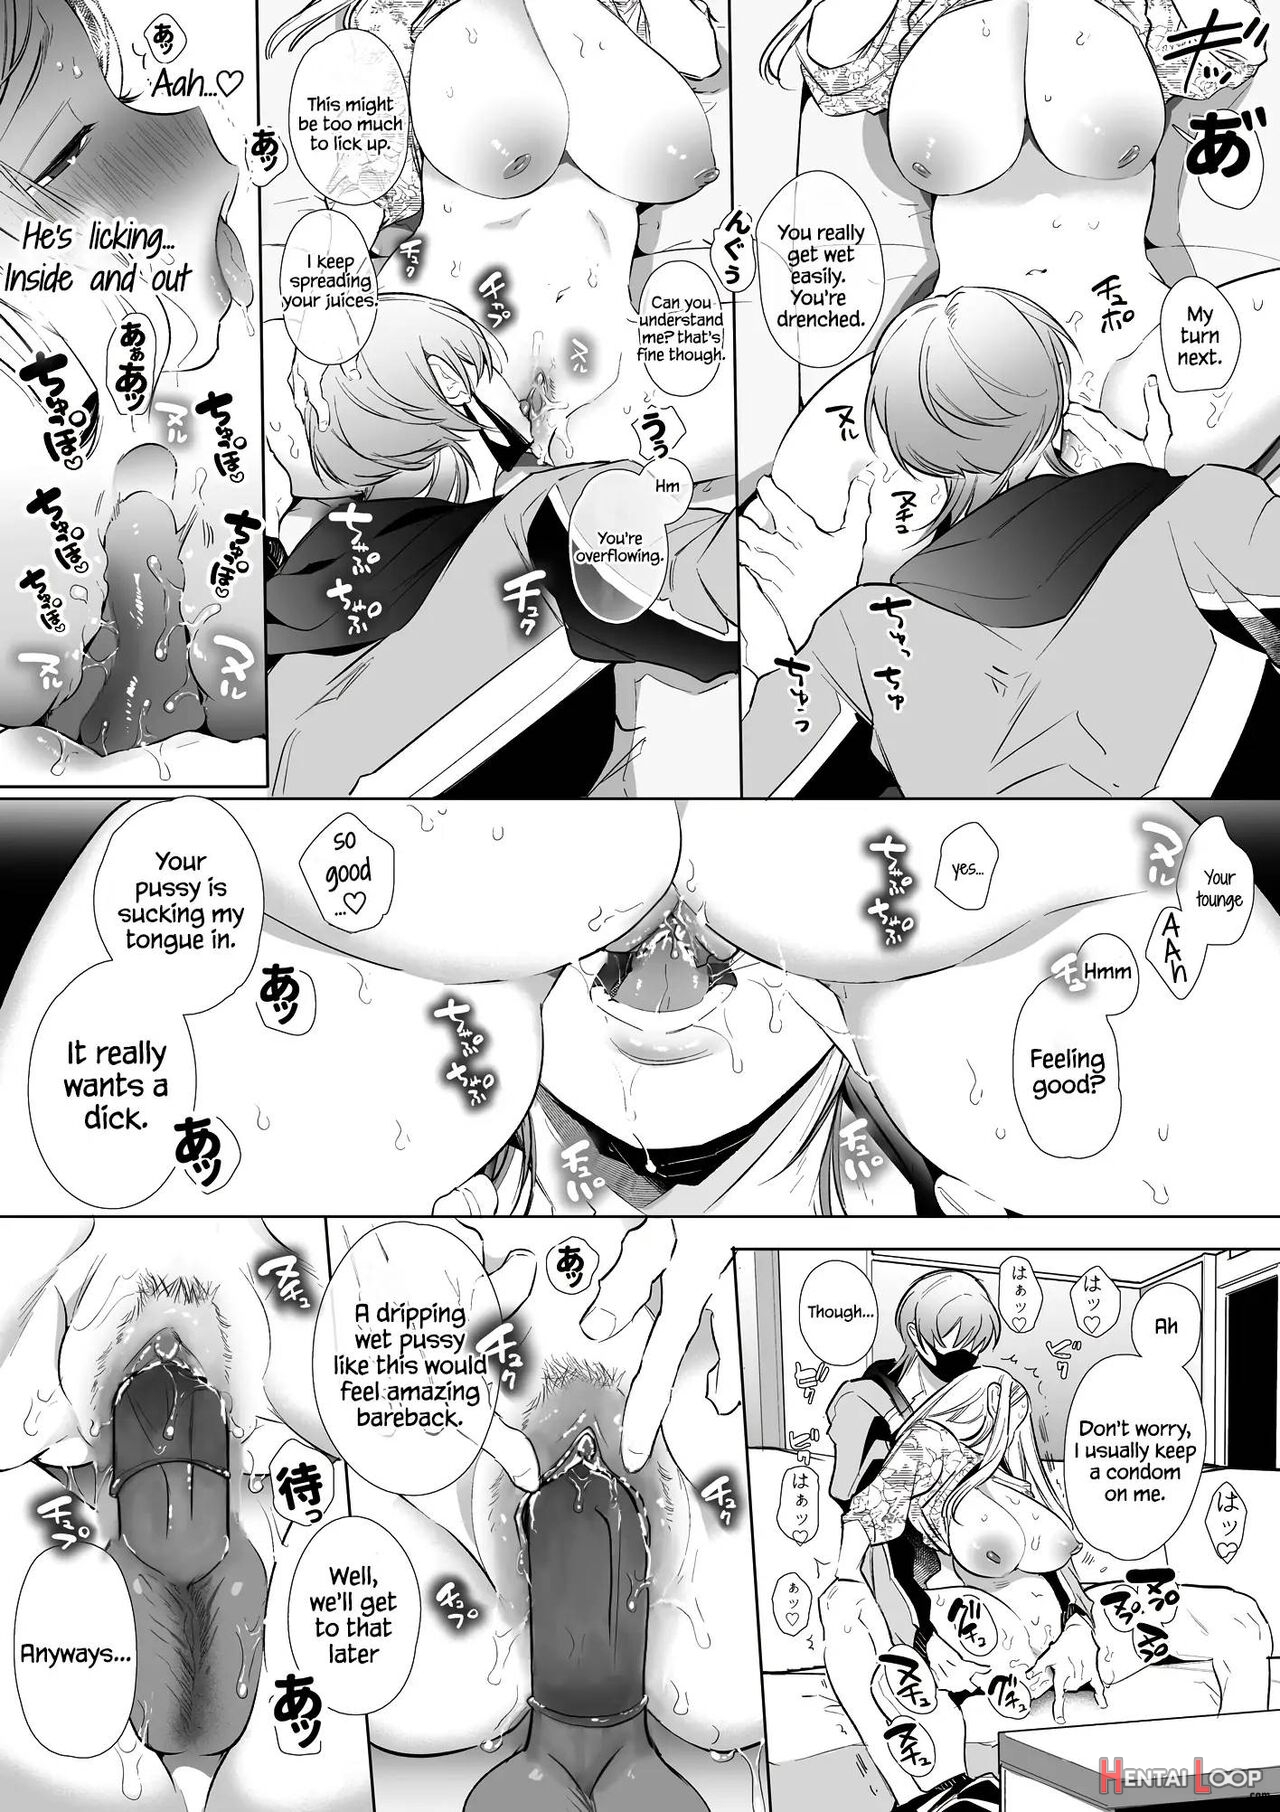 Kana-san Ntr ~ Degradation Of A Housewife By A Guy In An Alter Account ~ page 28